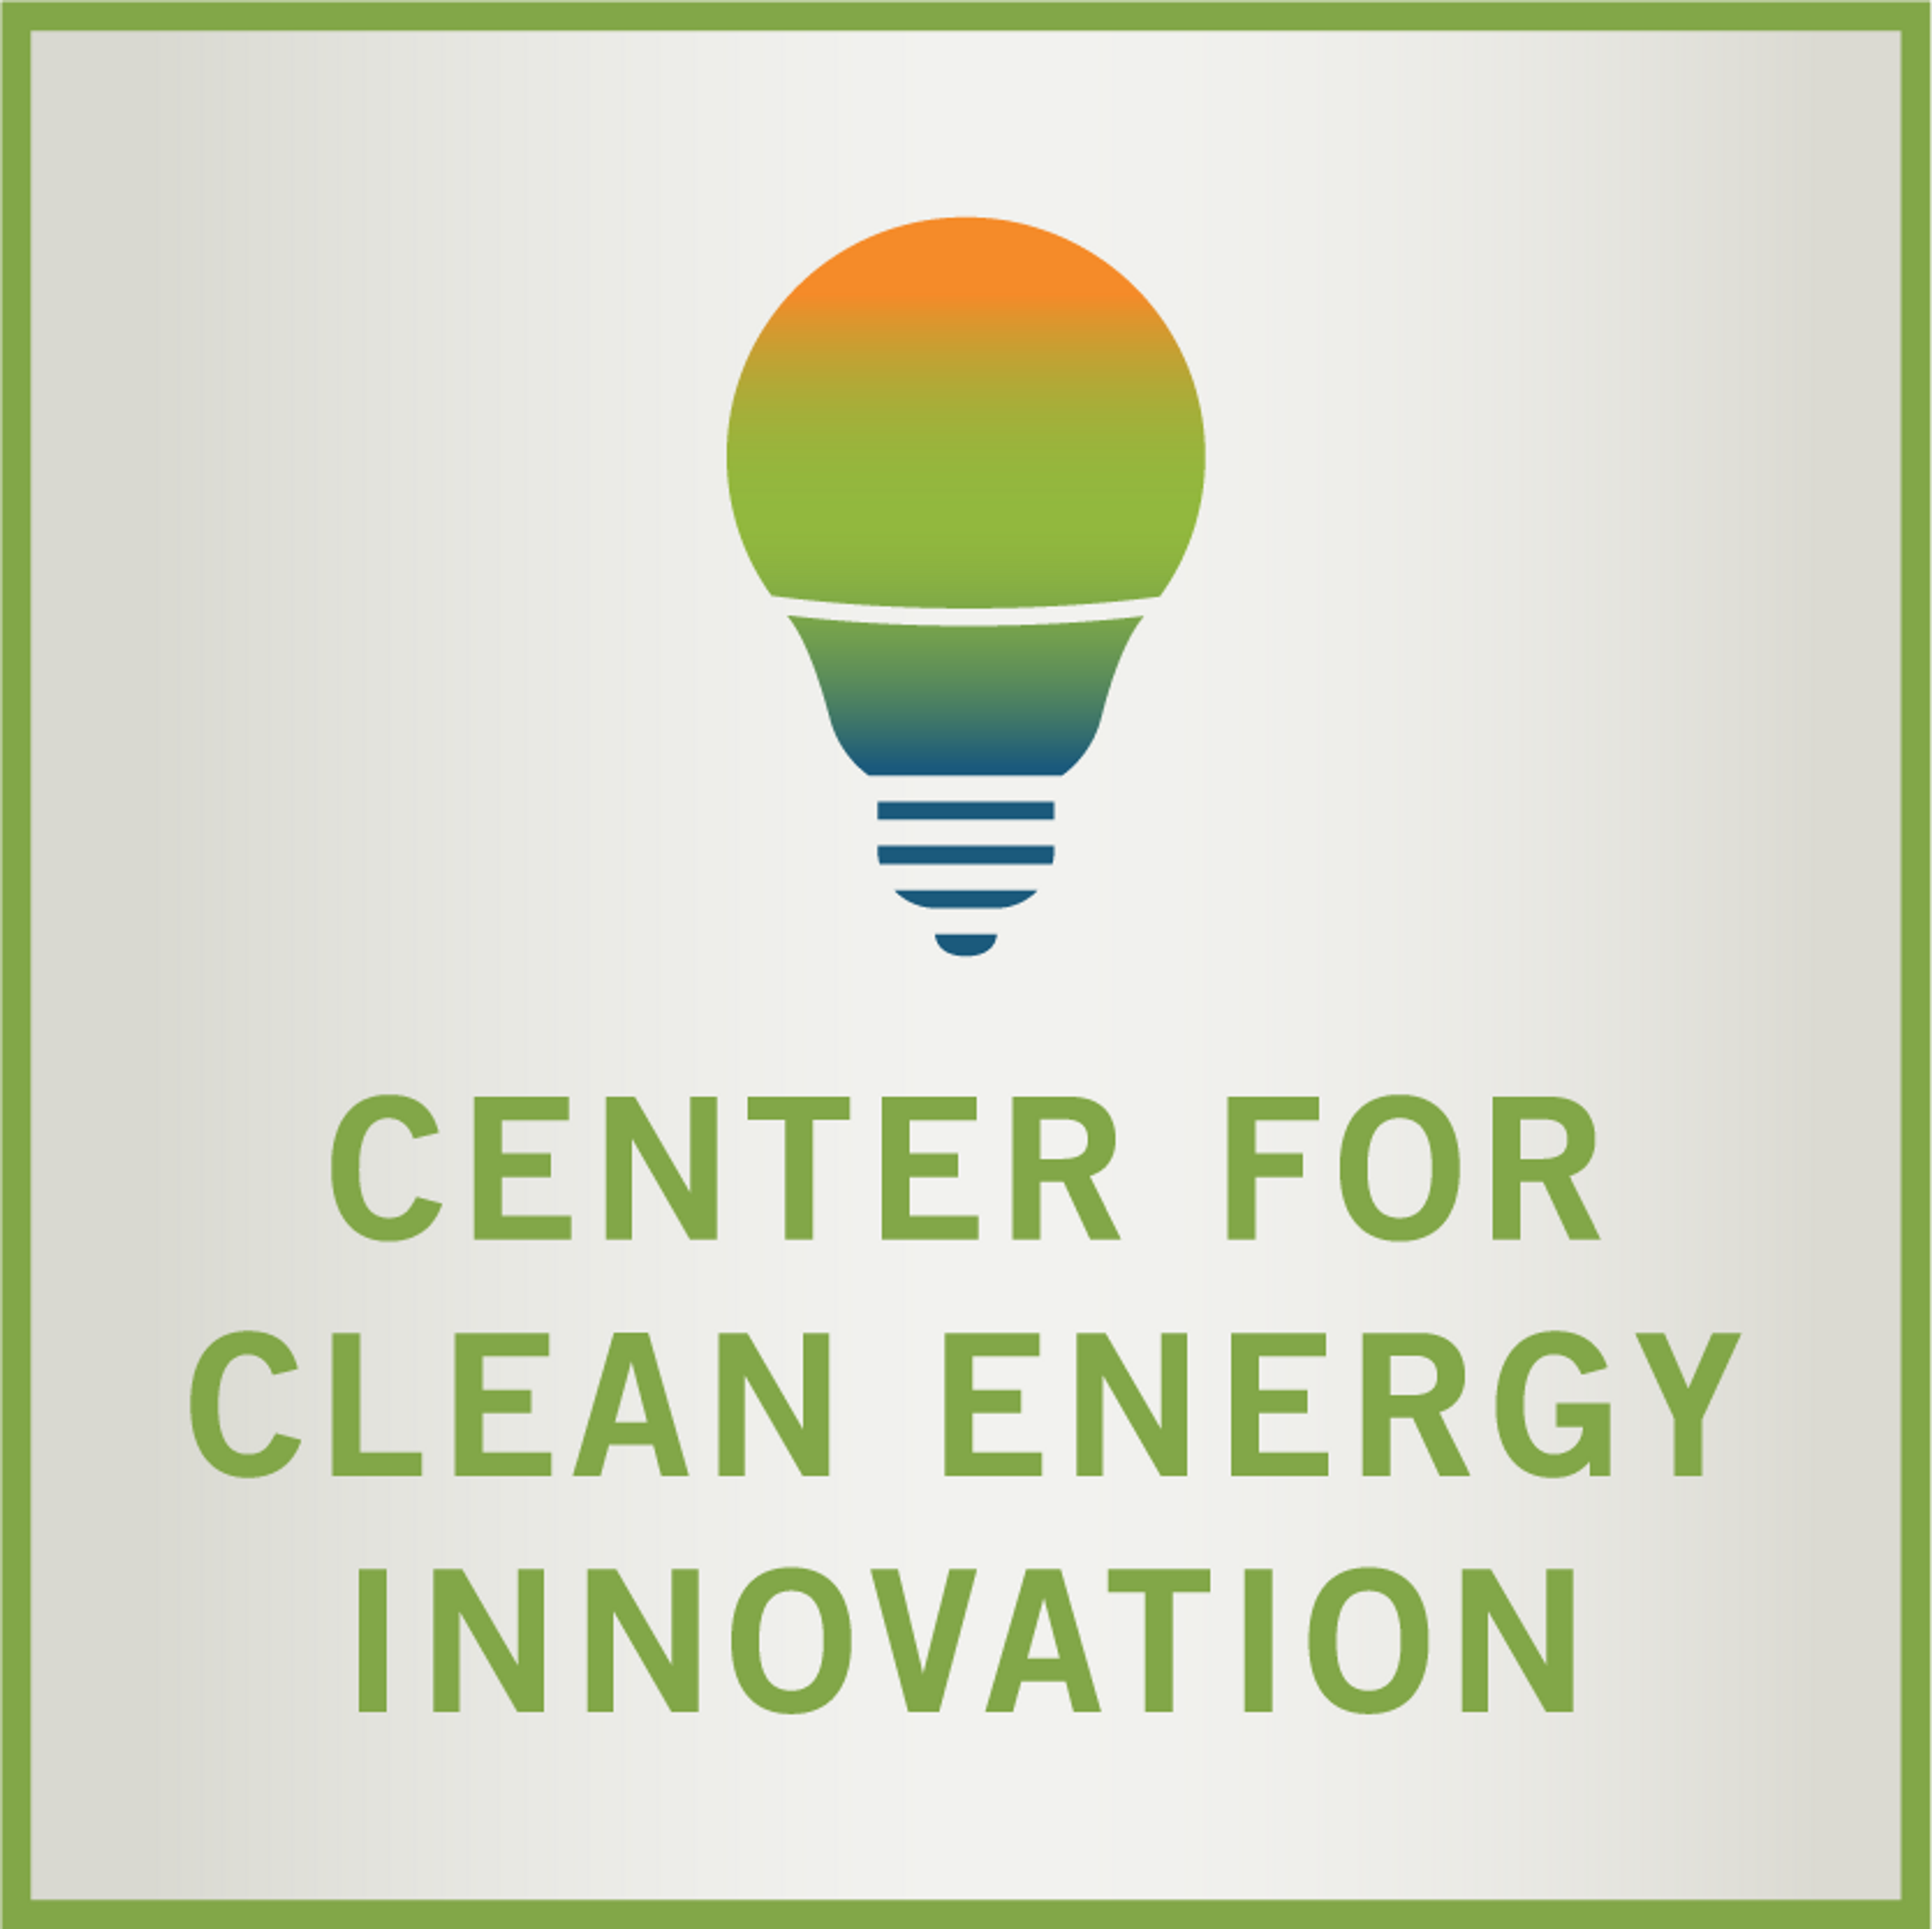 Collaboration Between Start-Ups and Federal Agencies: A Surprising Solution for Energy Innovation